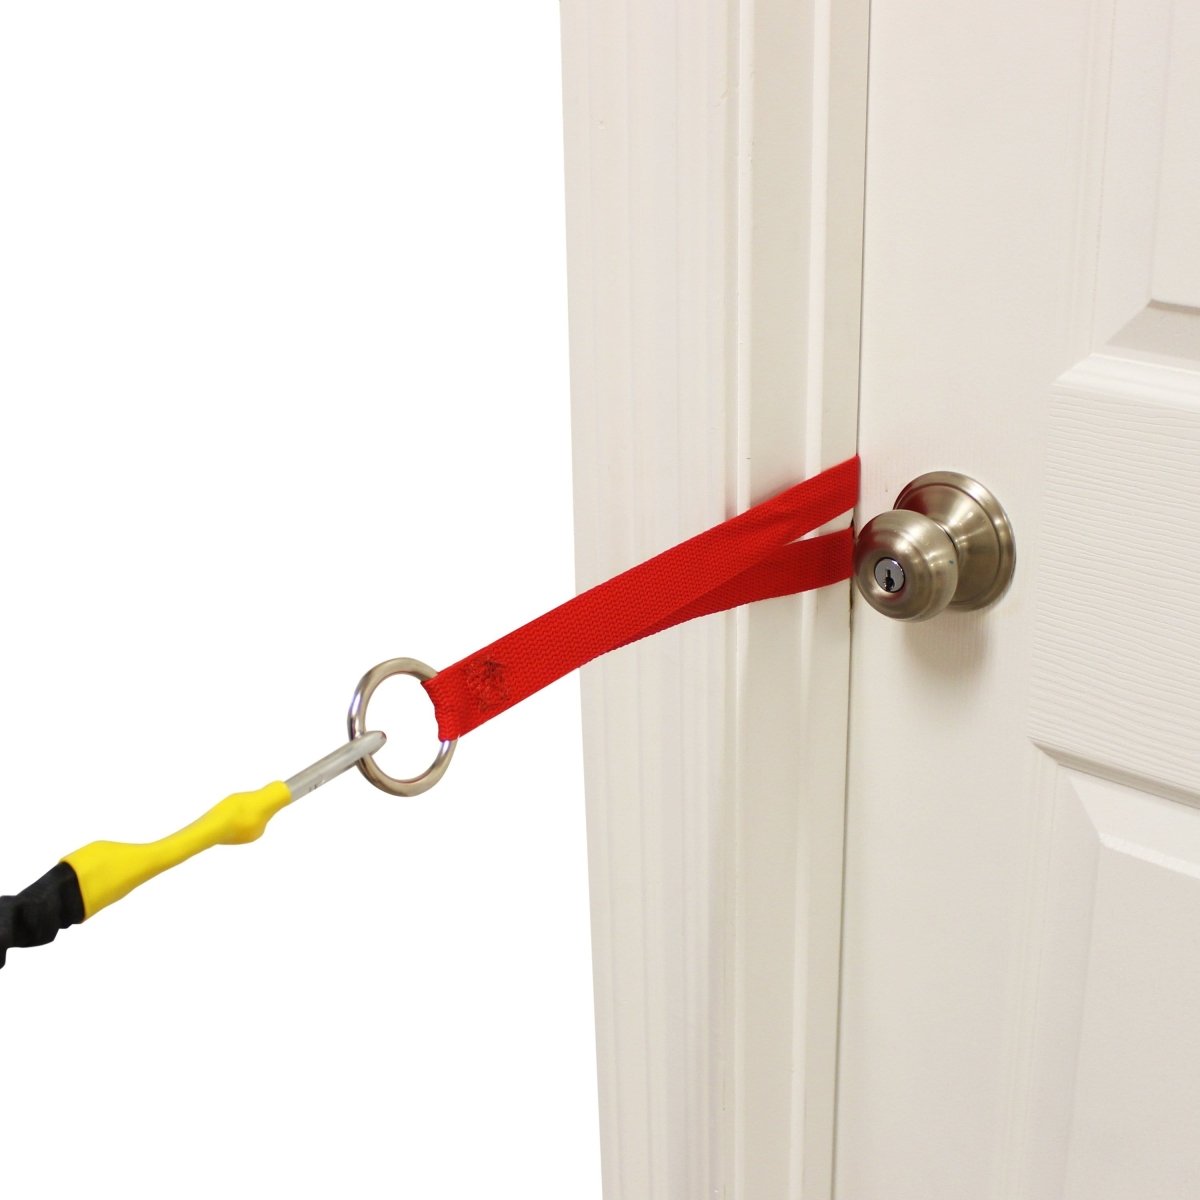 Single Hinge Door Anchor best resistance bands made in USA and covered for safety - FitCord Resistance Bands